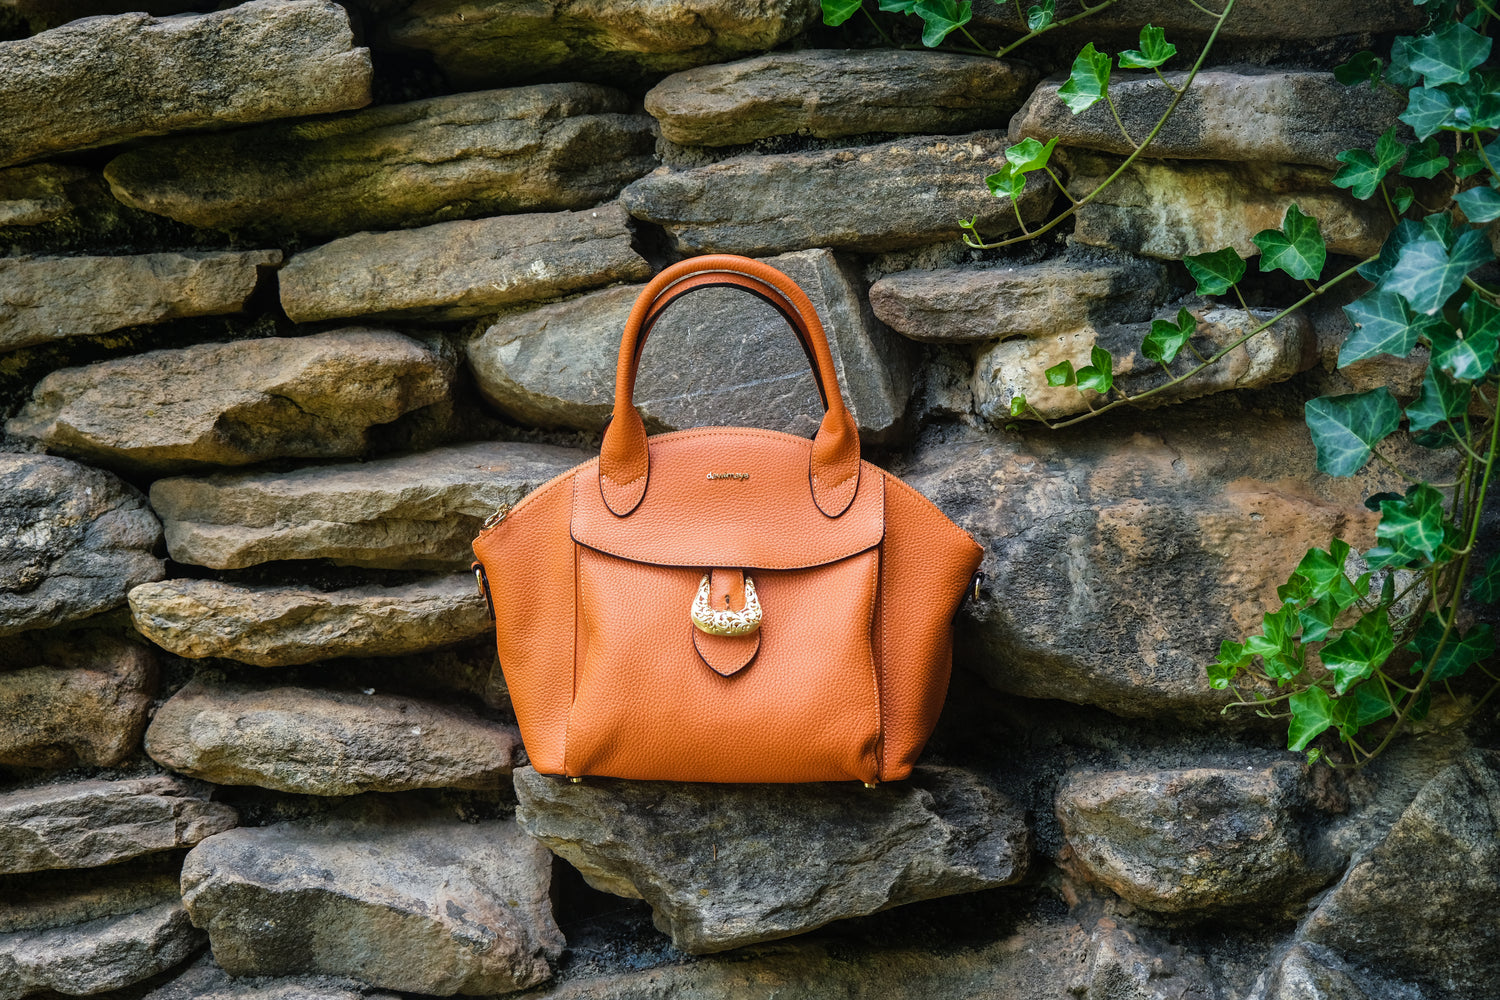 Bali Sunset Orange Pebble Grain Leather Handbag front view made by Dewi Maya  available at the best boutique in Upstate South Carolina Spartanburg Greenville Dewi Maya Boutique